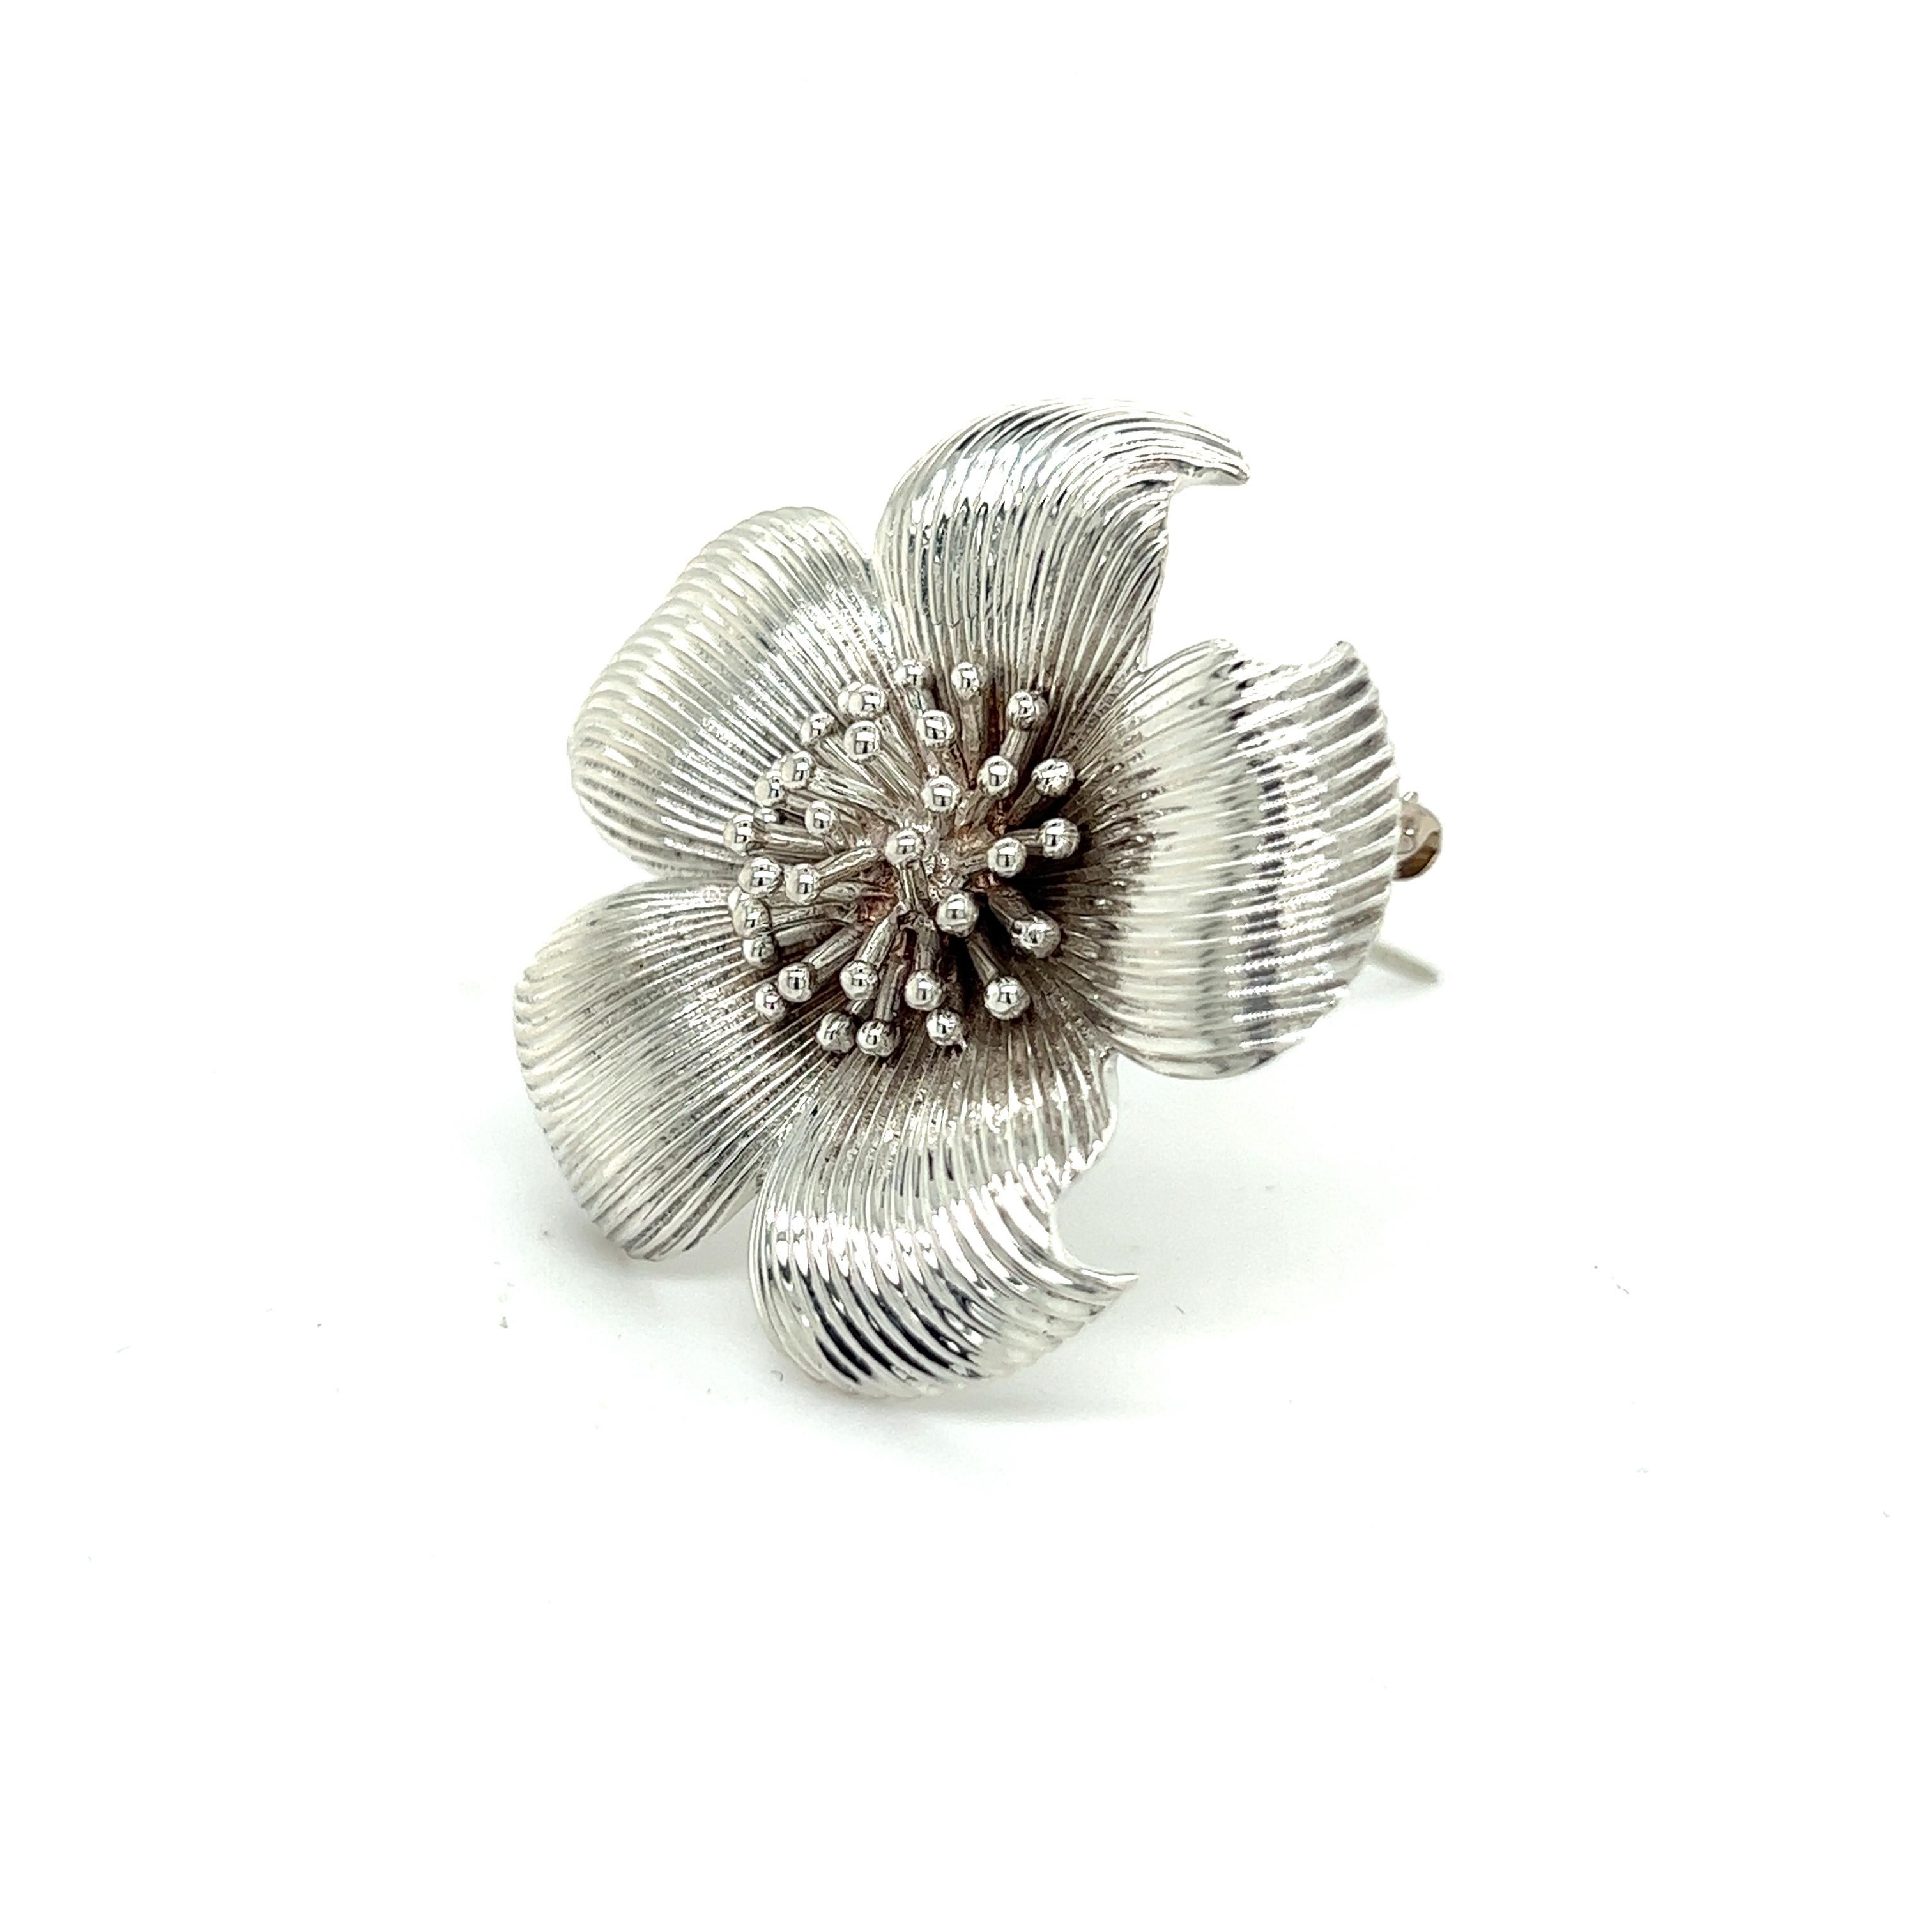 Authentic Tiffany & Co Estate Dagwood Flower brooch Pin Silver TIF380

This elegant Authentic Tiffany & Co Silver brooch has a weight of 17.3 Grams.

TRUSTED SELLER SINCE 2002

PLEASE SEE OUR HUNDREDS OF POSITIVE FEEDBACKS FROM OUR CLIENTS!!

FREE